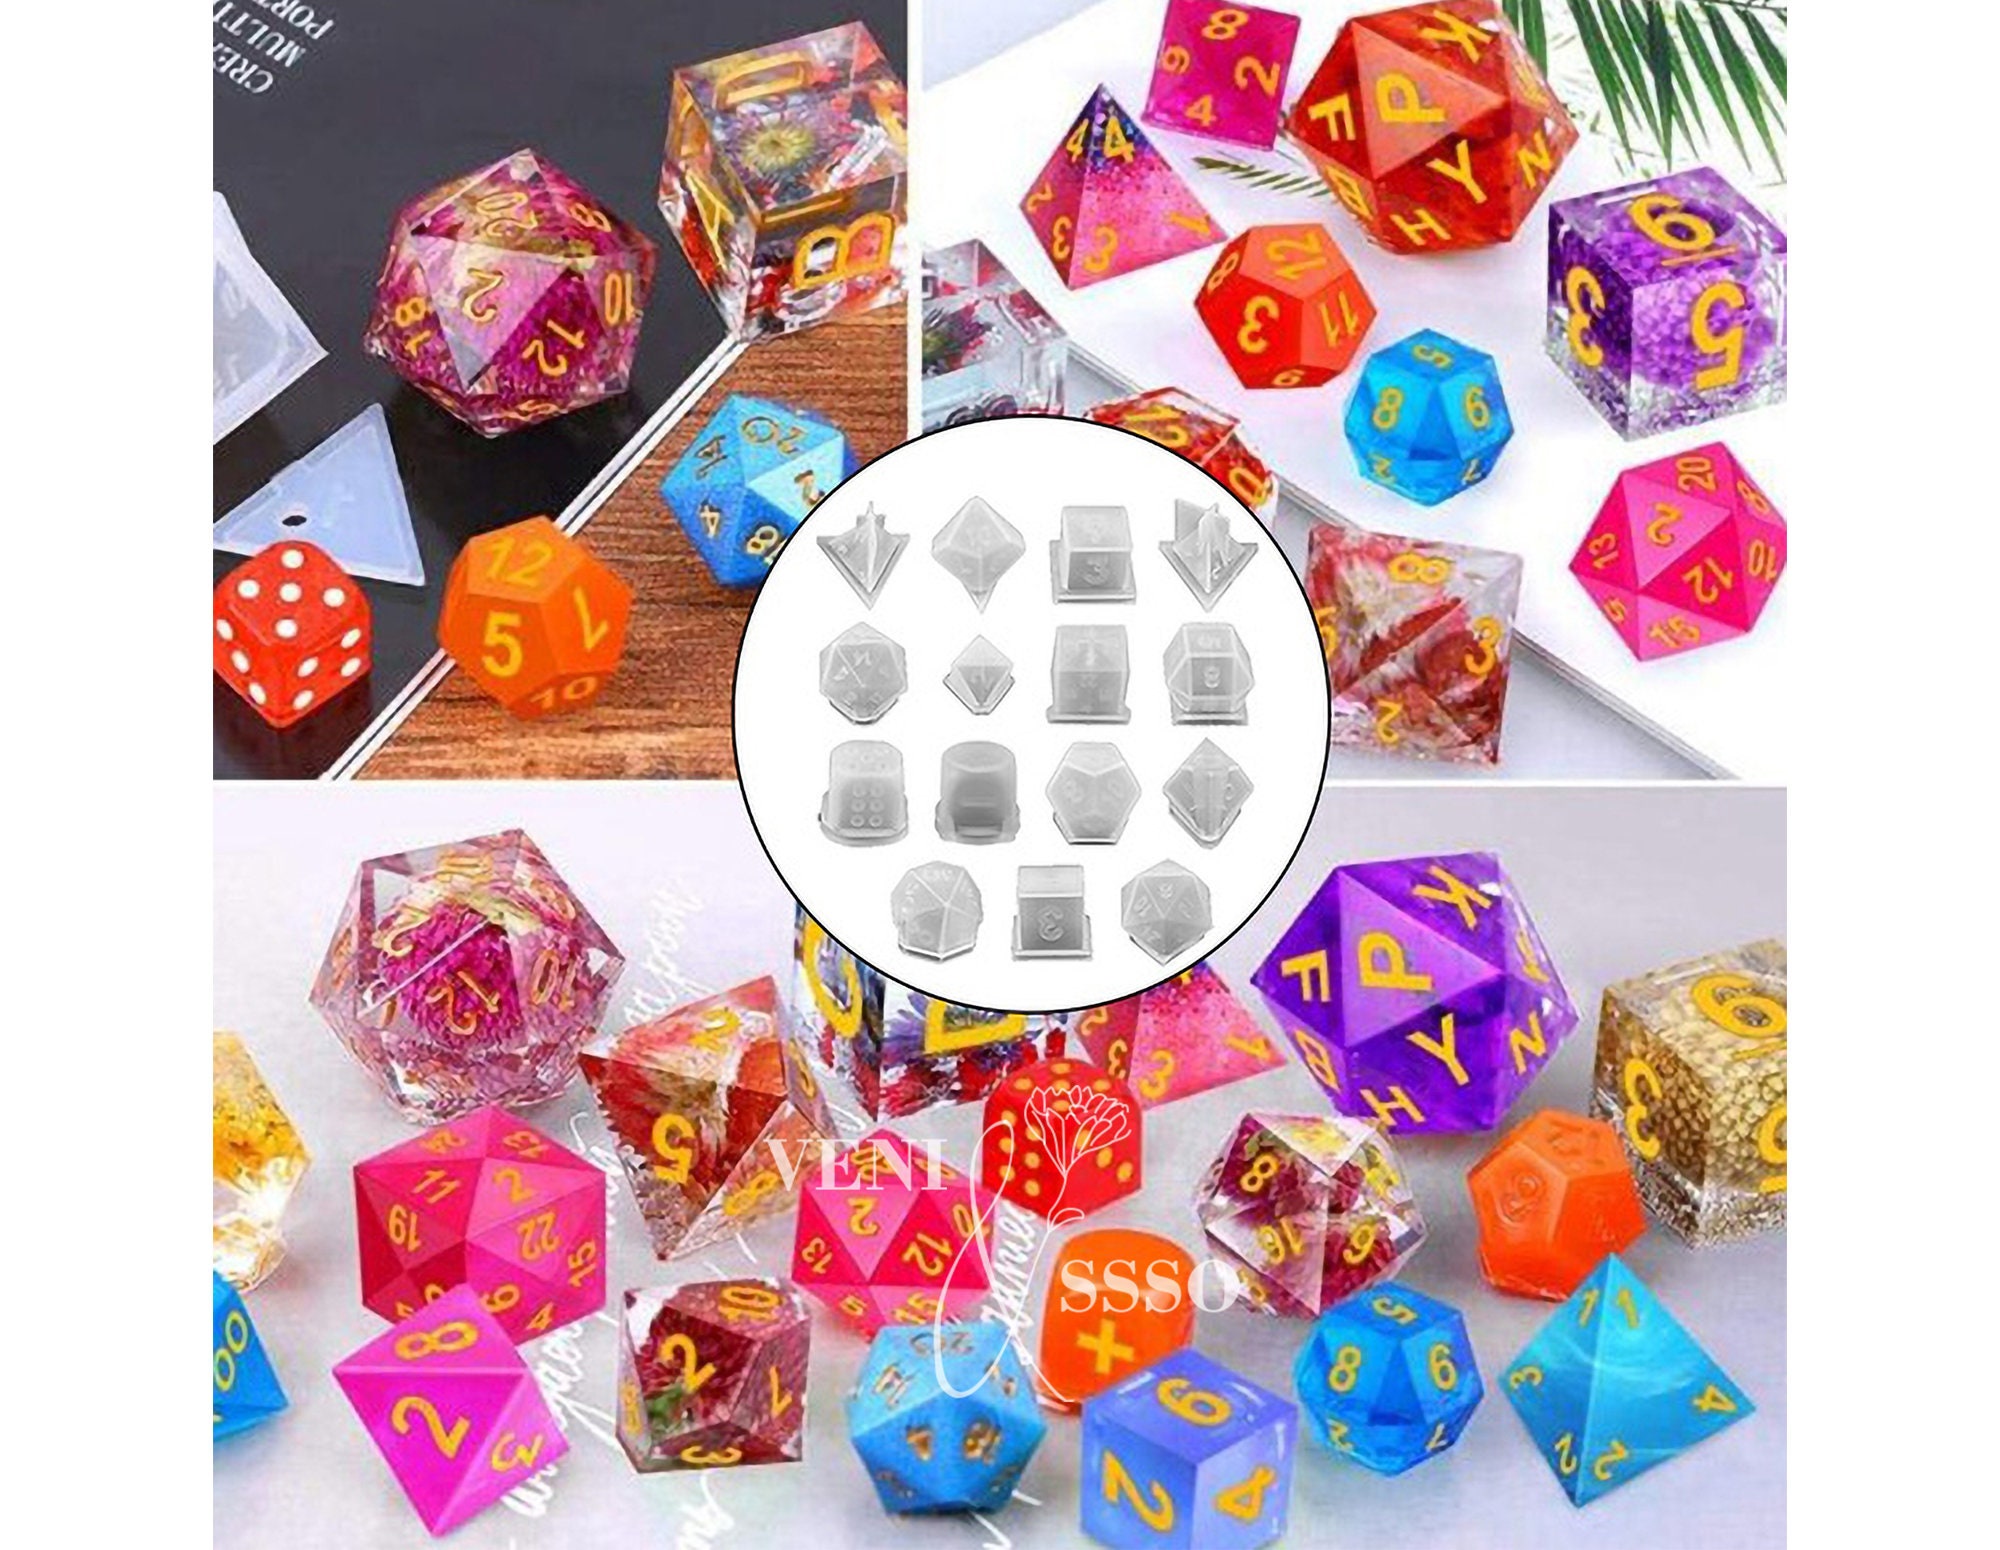 3D Dice Mold,dnd Dice Resin Mold, Polyhedral Dice Silicone Mold